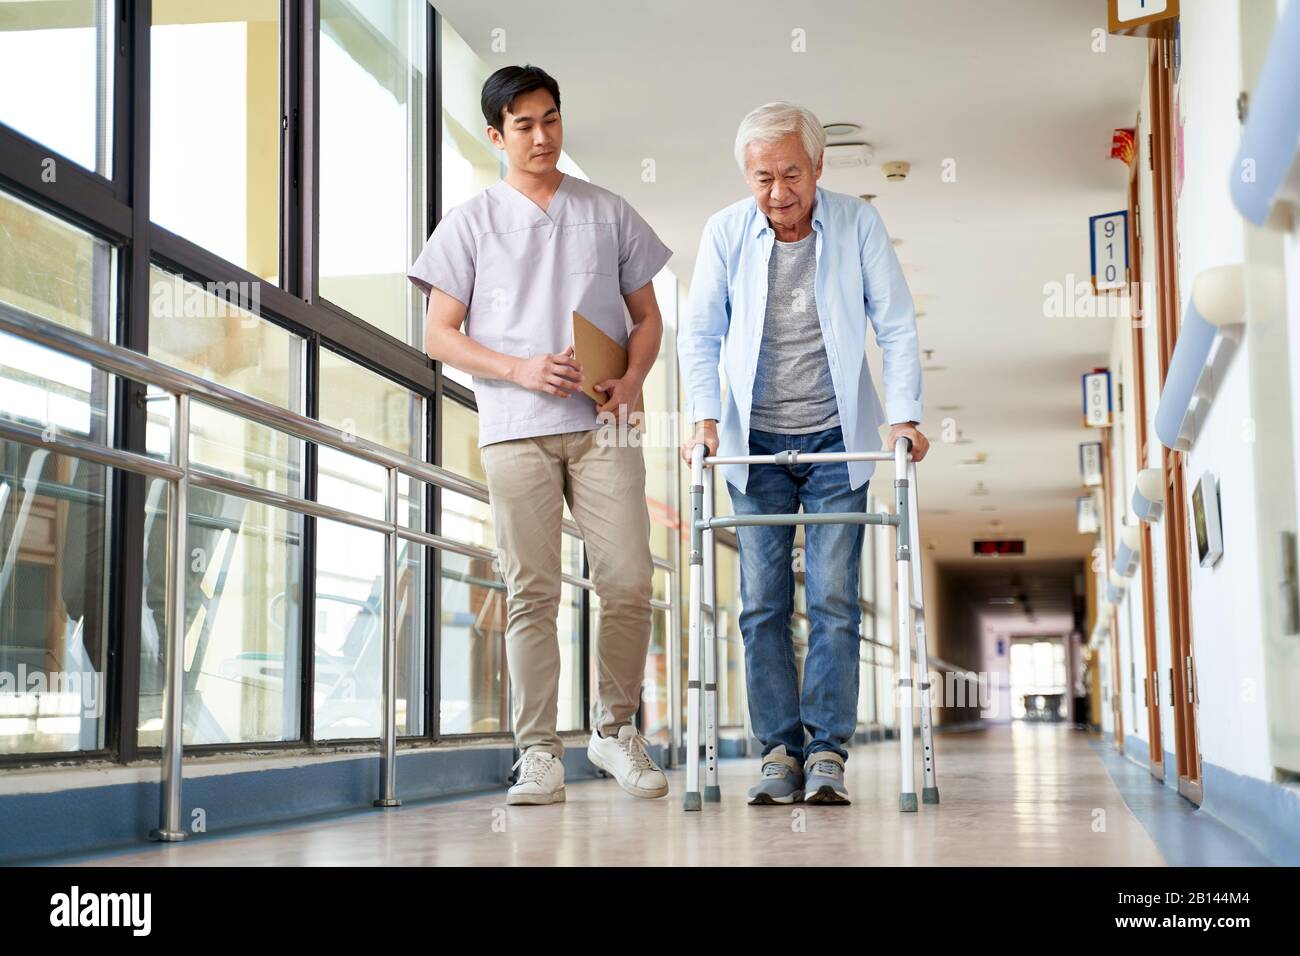 young asian physical therapist working with senior man on walking using a walker Stock Photo